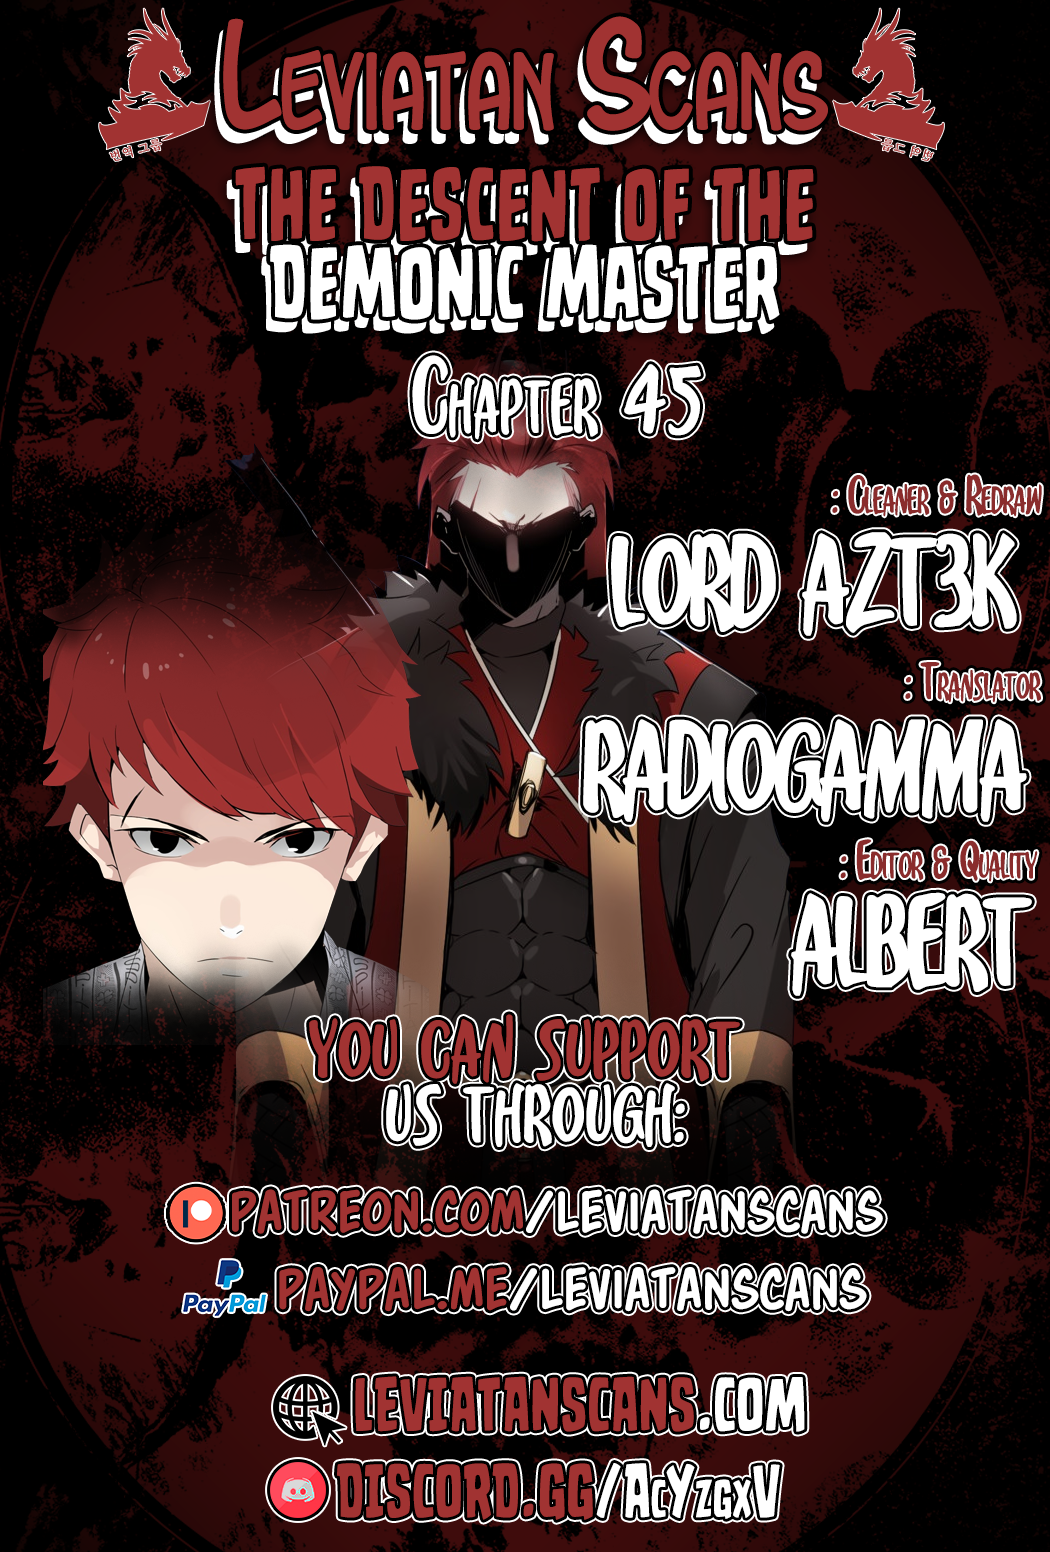 The Descent of the Demonic Master - Chapter 306 - Image 1